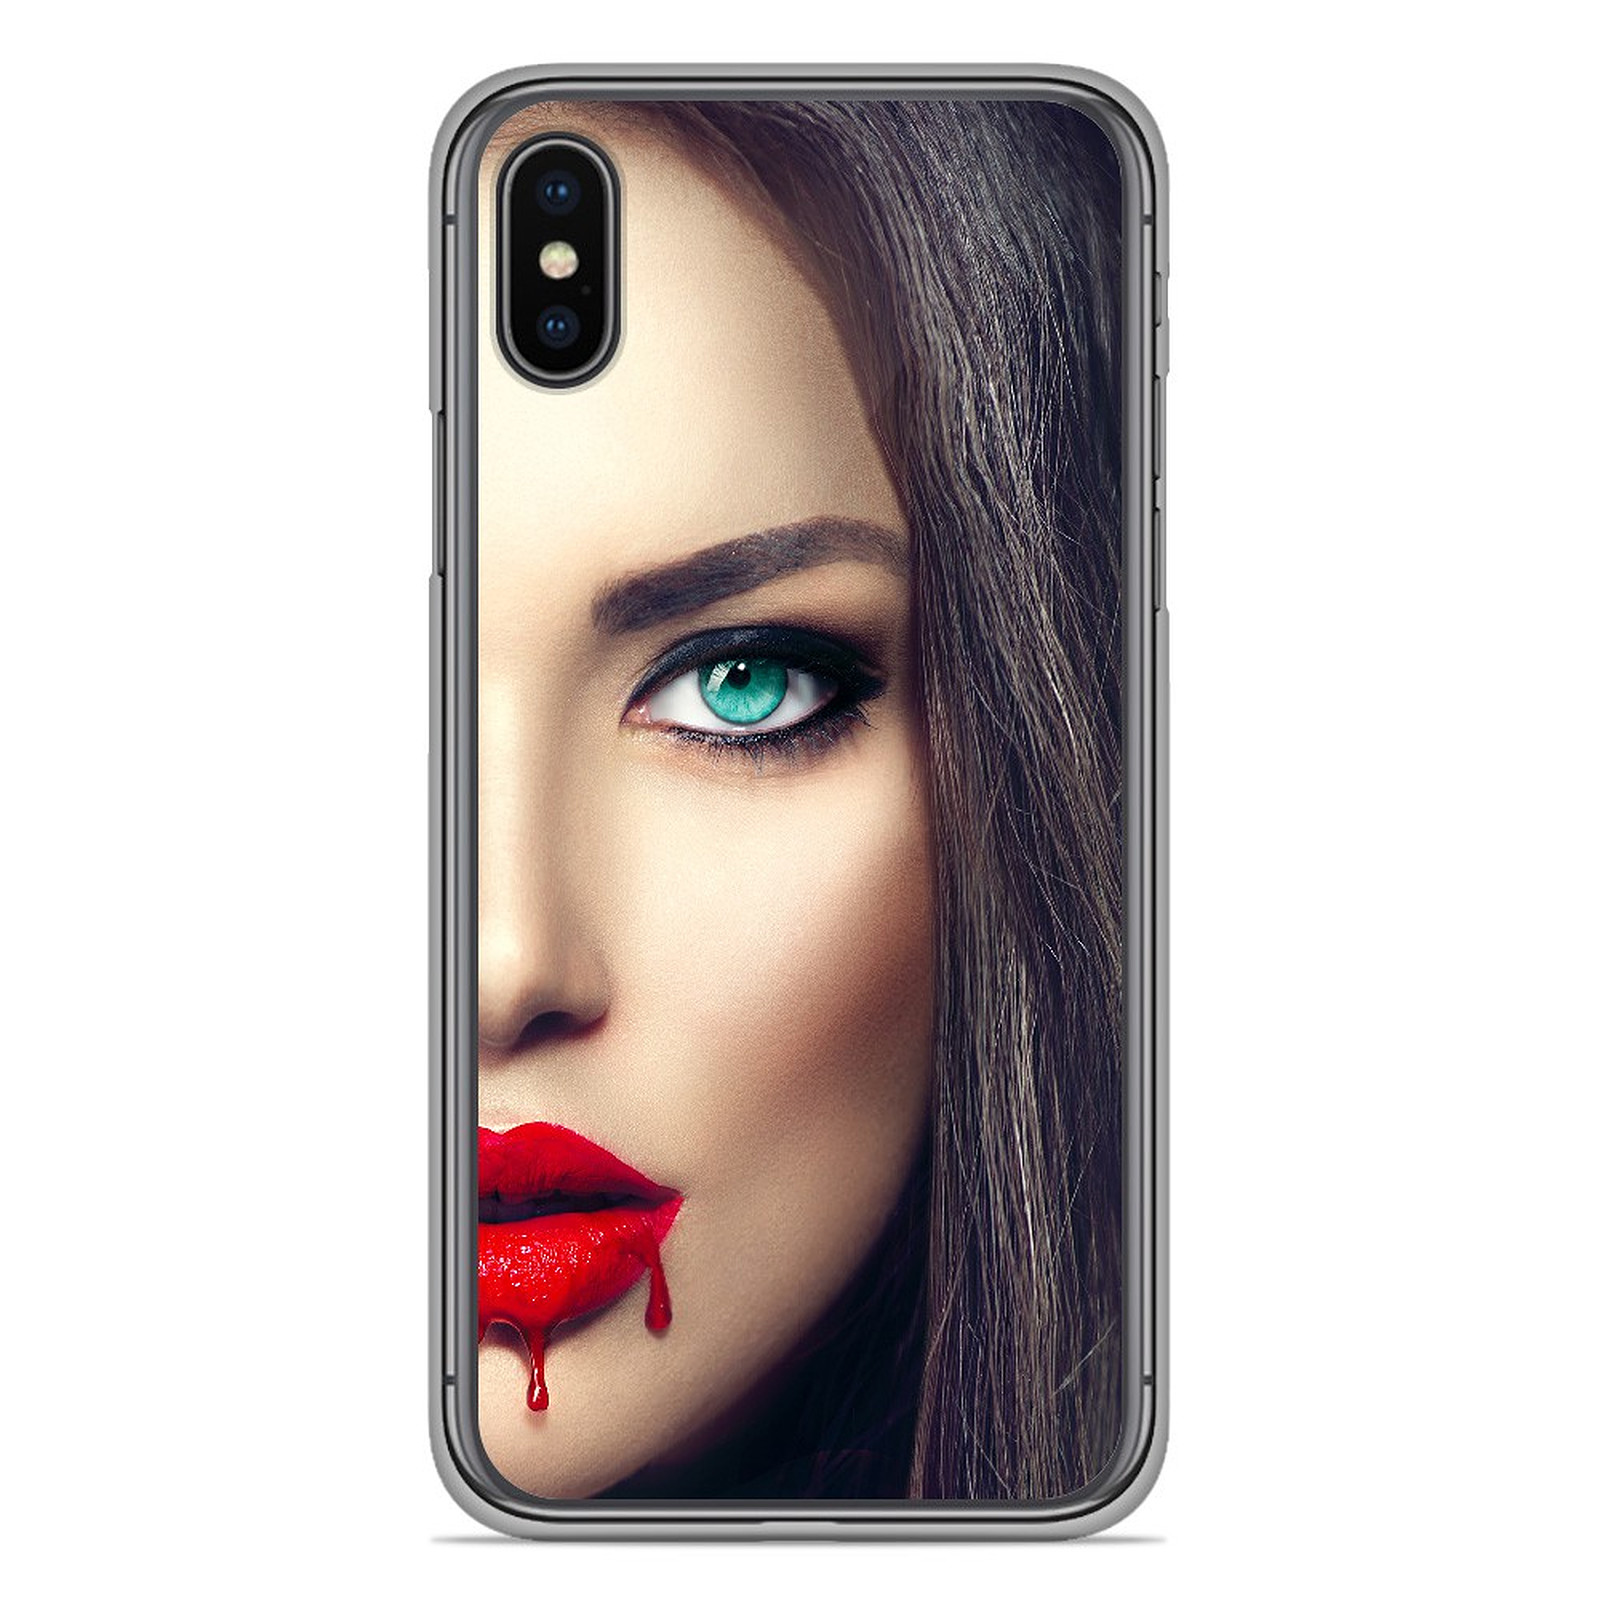 1001 Coques Coque silicone gel Apple iPhone XS Max motif Lèvres Sang - Coque telephone 1001Coques